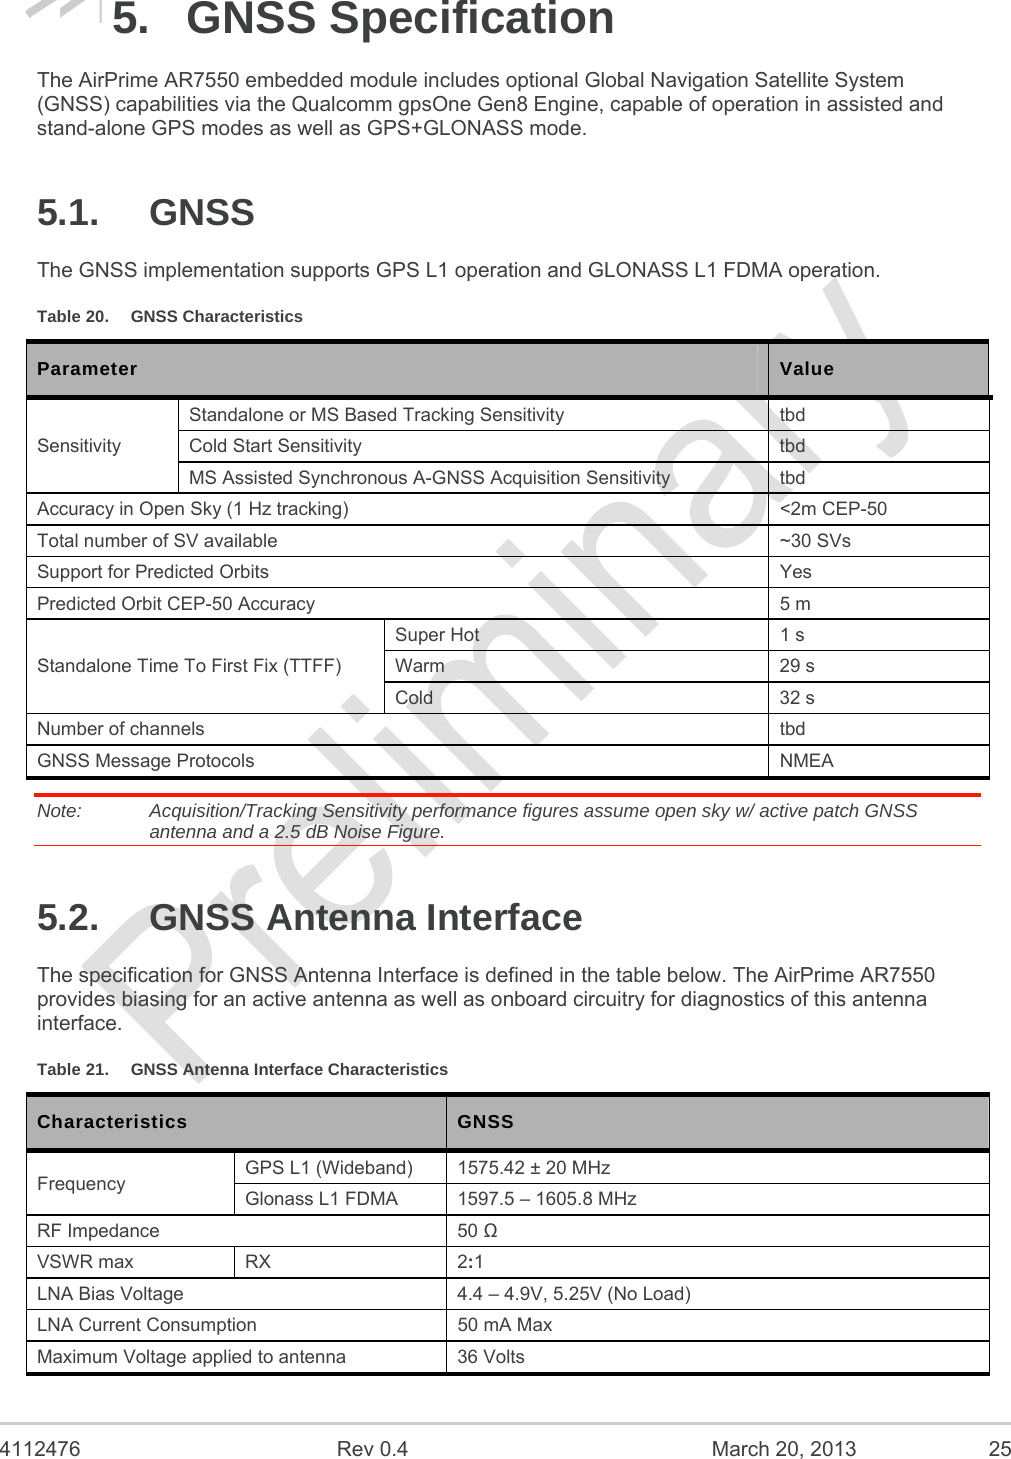  4112476  Rev 0.4  March 20, 2013  25 5. GNSS Specification The AirPrime AR7550 embedded module includes optional Global Navigation Satellite System (GNSS) capabilities via the Qualcomm gpsOne Gen8 Engine, capable of operation in assisted and stand-alone GPS modes as well as GPS+GLONASS mode. 5.1. GNSS The GNSS implementation supports GPS L1 operation and GLONASS L1 FDMA operation. Table 20.  GNSS Characteristics Parameter  Value Sensitivity Standalone or MS Based Tracking Sensitivity  tbd Cold Start Sensitivity  tbd MS Assisted Synchronous A-GNSS Acquisition Sensitivity  tbd Accuracy in Open Sky (1 Hz tracking)  &lt;2m CEP-50 Total number of SV available  ~30 SVs Support for Predicted Orbits  Yes Predicted Orbit CEP-50 Accuracy  5 m Standalone Time To First Fix (TTFF) Super Hot  1 s Warm 29 s Cold 32 s Number of channels  tbd GNSS Message Protocols  NMEA Note:   Acquisition/Tracking Sensitivity performance figures assume open sky w/ active patch GNSS antenna and a 2.5 dB Noise Figure. 5.2. GNSS Antenna Interface The specification for GNSS Antenna Interface is defined in the table below. The AirPrime AR7550 provides biasing for an active antenna as well as onboard circuitry for diagnostics of this antenna interface. Table 21.  GNSS Antenna Interface Characteristics Characteristics  GNSS Frequency  GPS L1 (Wideband)  1575.42 ± 20 MHz Glonass L1 FDMA  1597.5 – 1605.8 MHz RF Impedance  50  VSWR max  RX  2:1 LNA Bias Voltage  4.4 – 4.9V, 5.25V (No Load) LNA Current Consumption  50 mA Max Maximum Voltage applied to antenna  36 Volts 